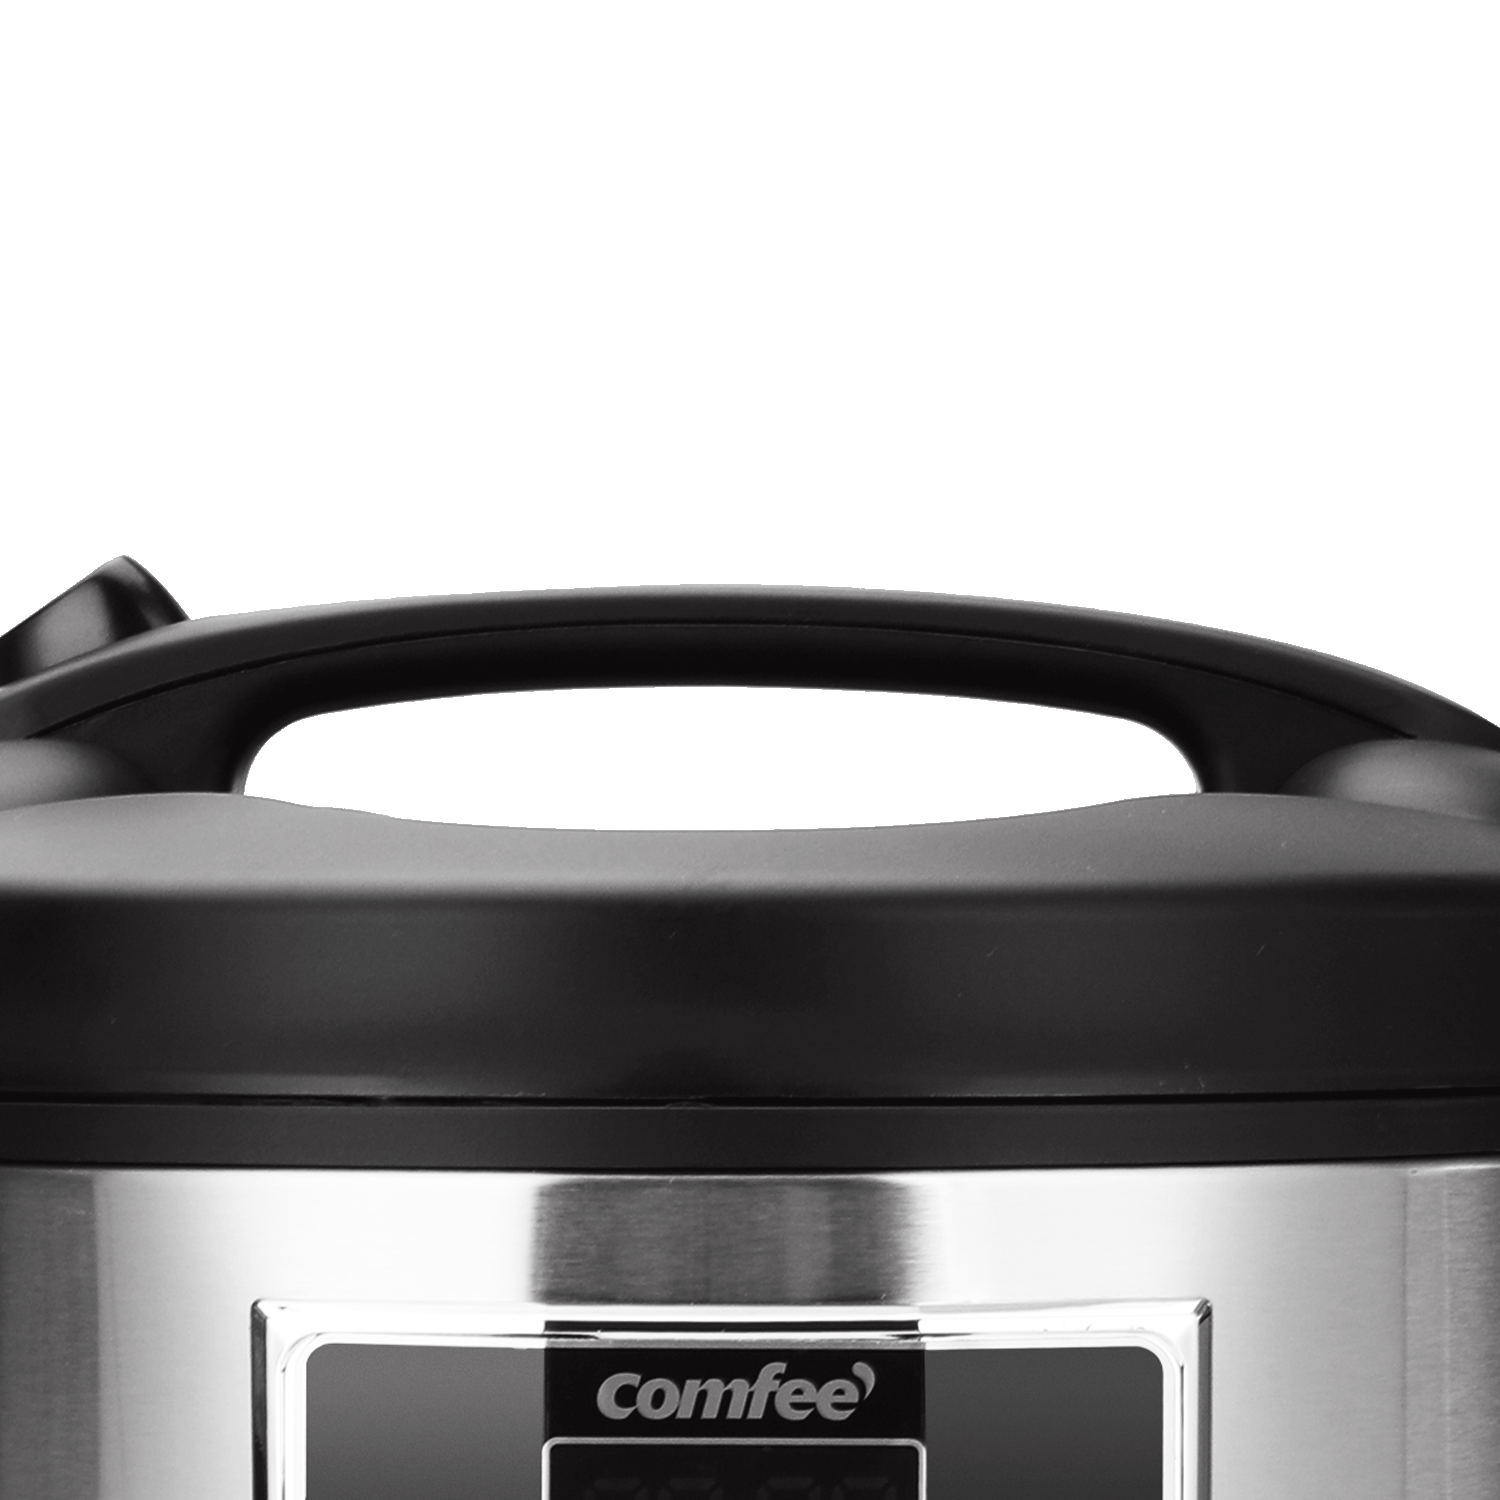 https://d1pjg4o0tbonat.cloudfront.net/content/dam/comfee-aem/global/products/small-appliances/all-in-1-multi-cooker-rice-cooker-mb-m25/kv4.png/jcr:content/renditions/cq5dam.compression.png